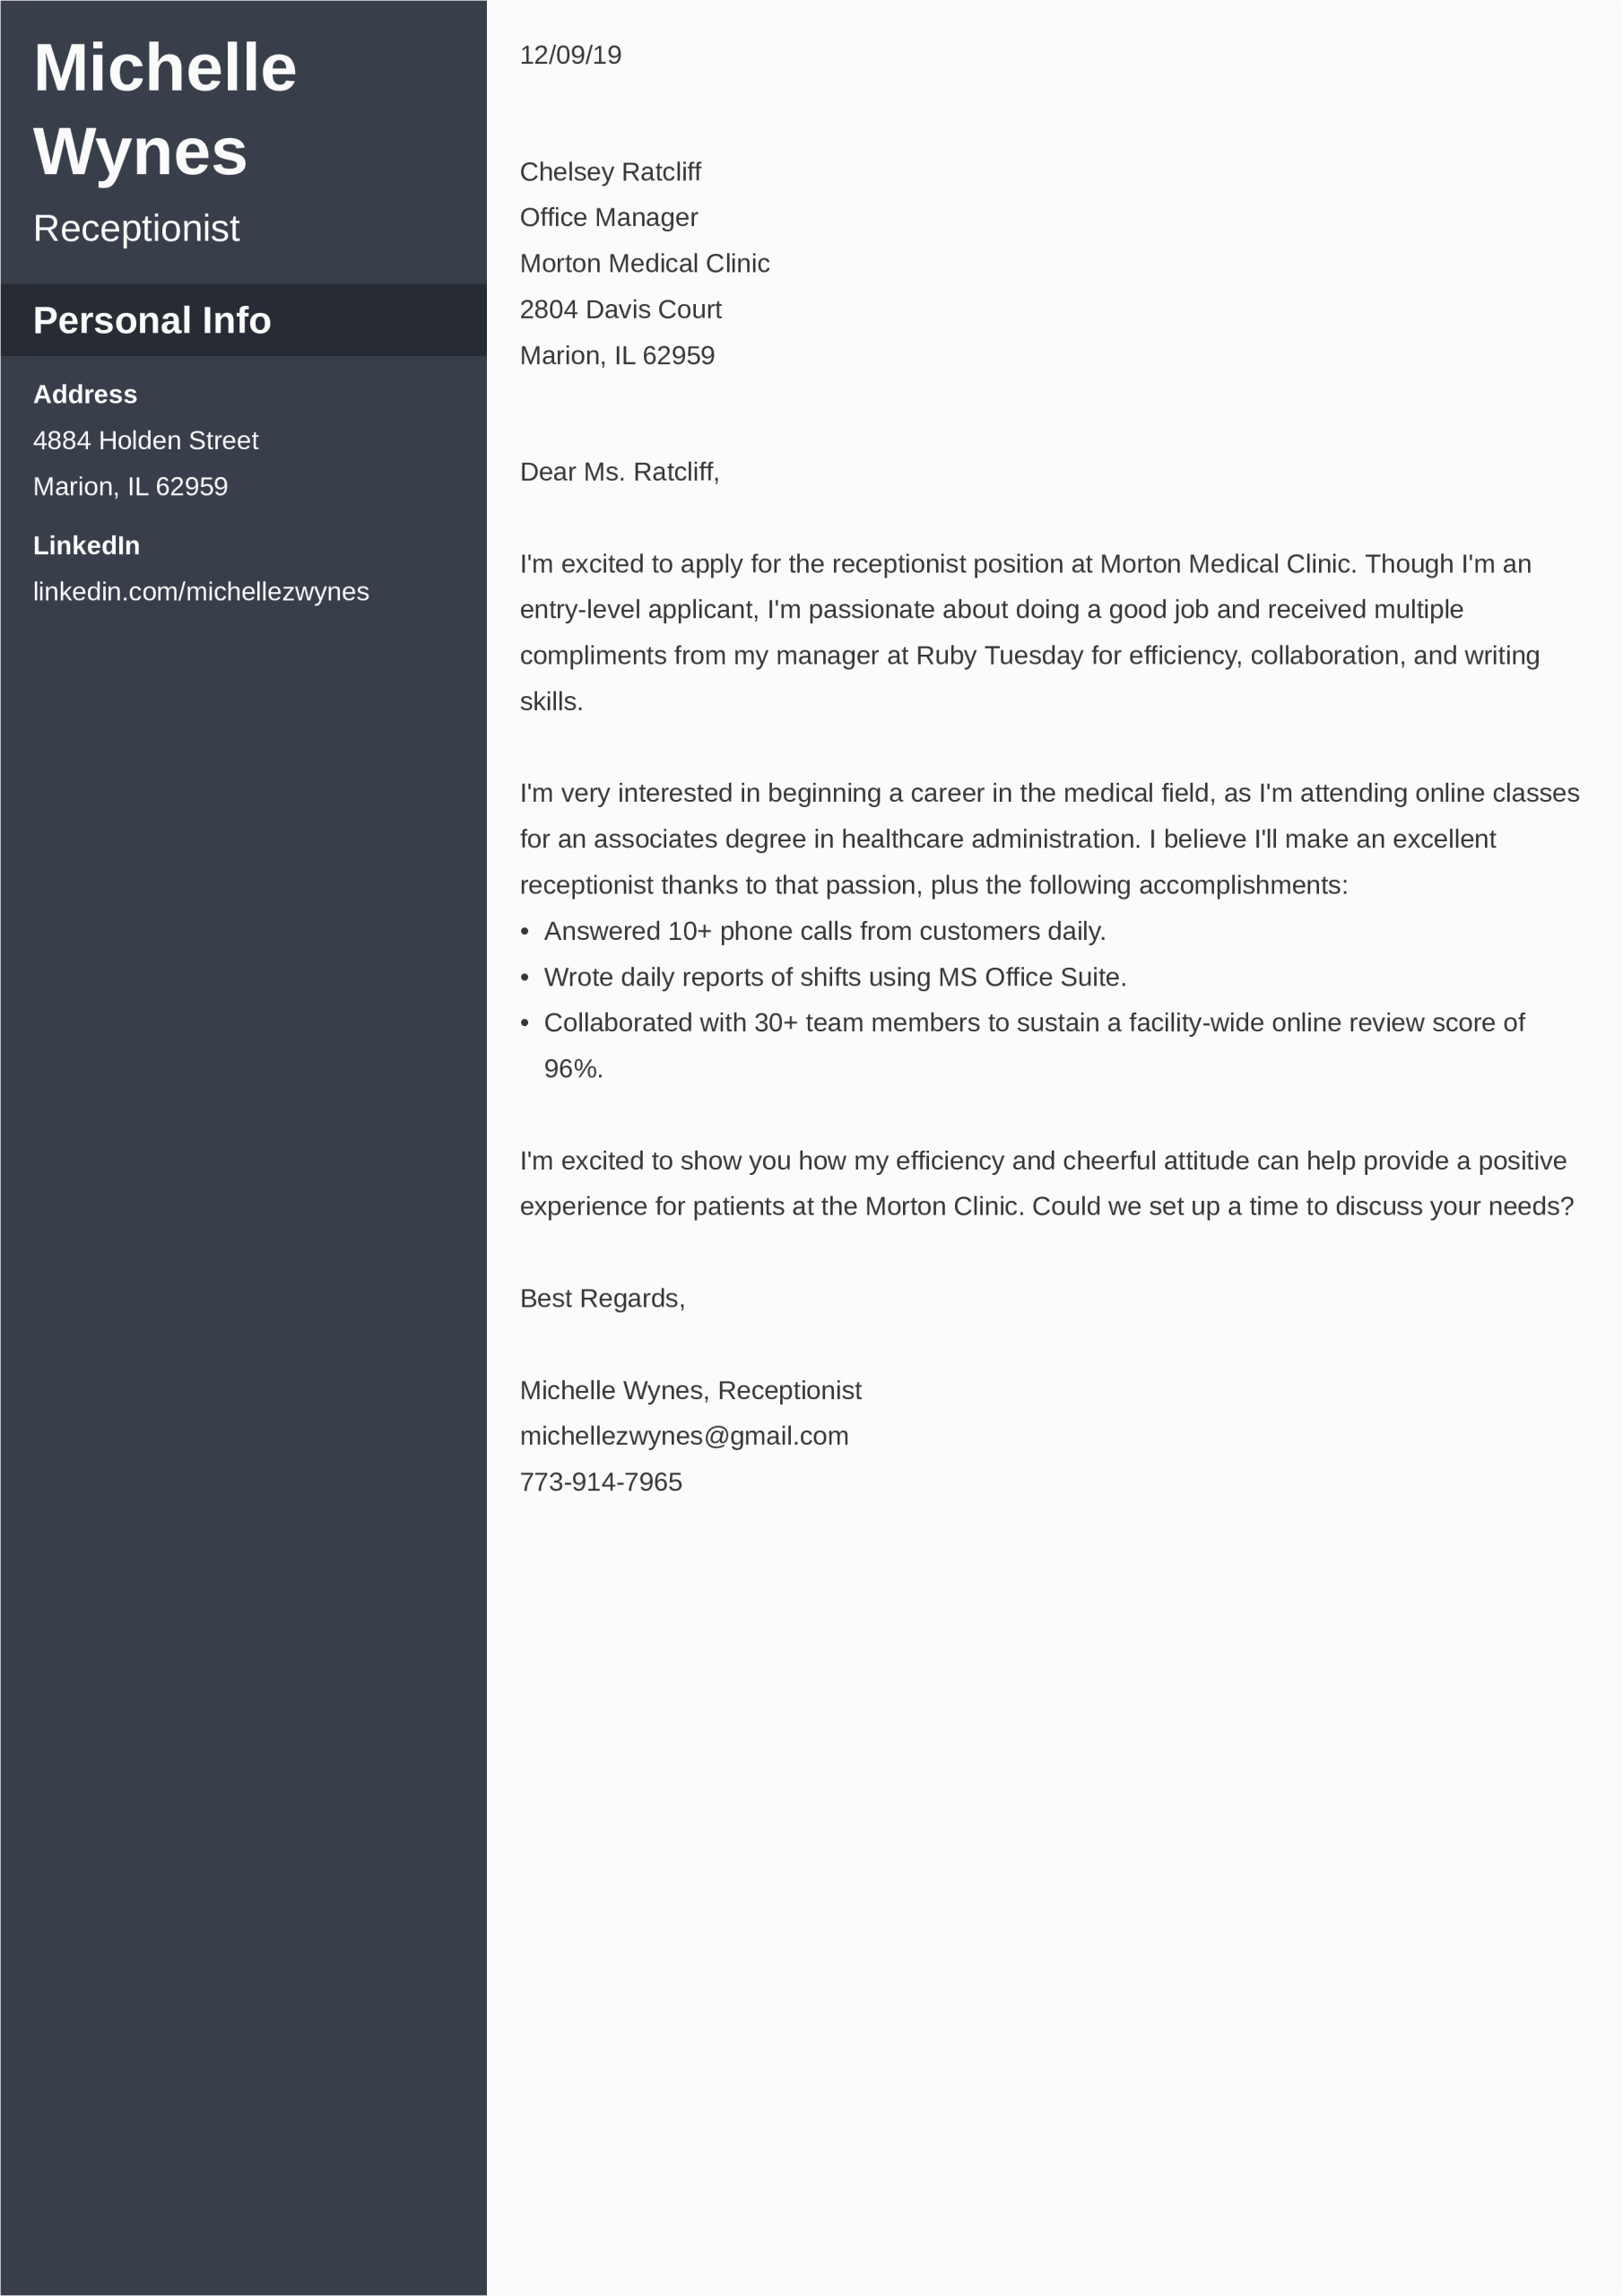 Sample Cover Letter for Resume No Experience How to Write A Cover Letter with No Experience—examples